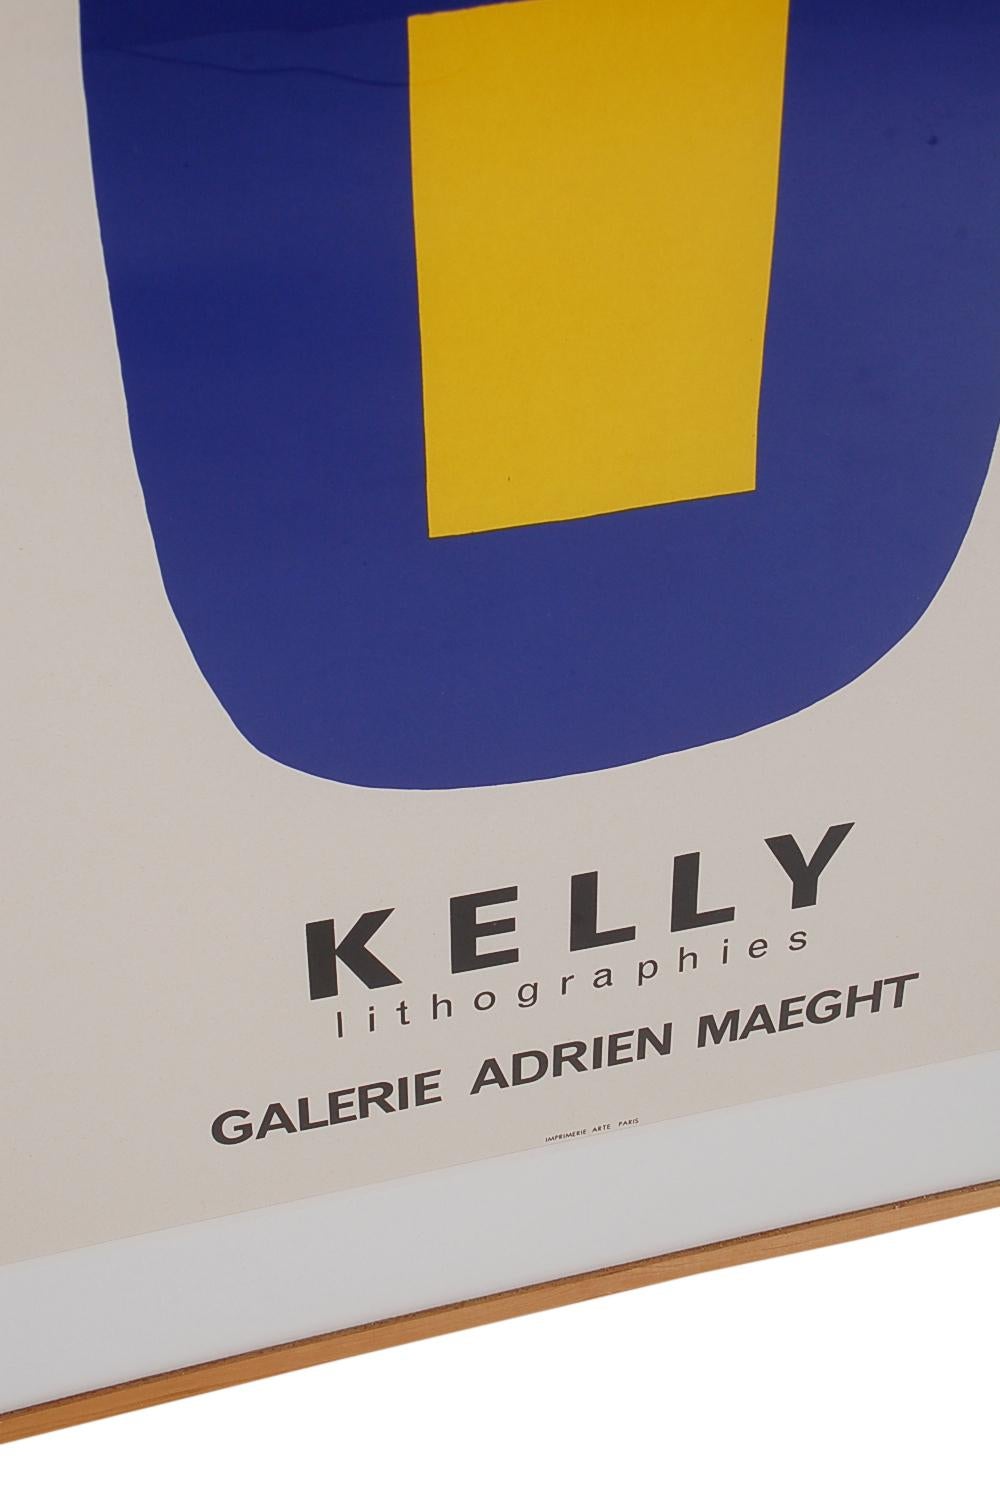 Mid-Century Modern Modern Graphic Art by Ellsworth Kelly Lithographie for Galerie Adrien Maeght